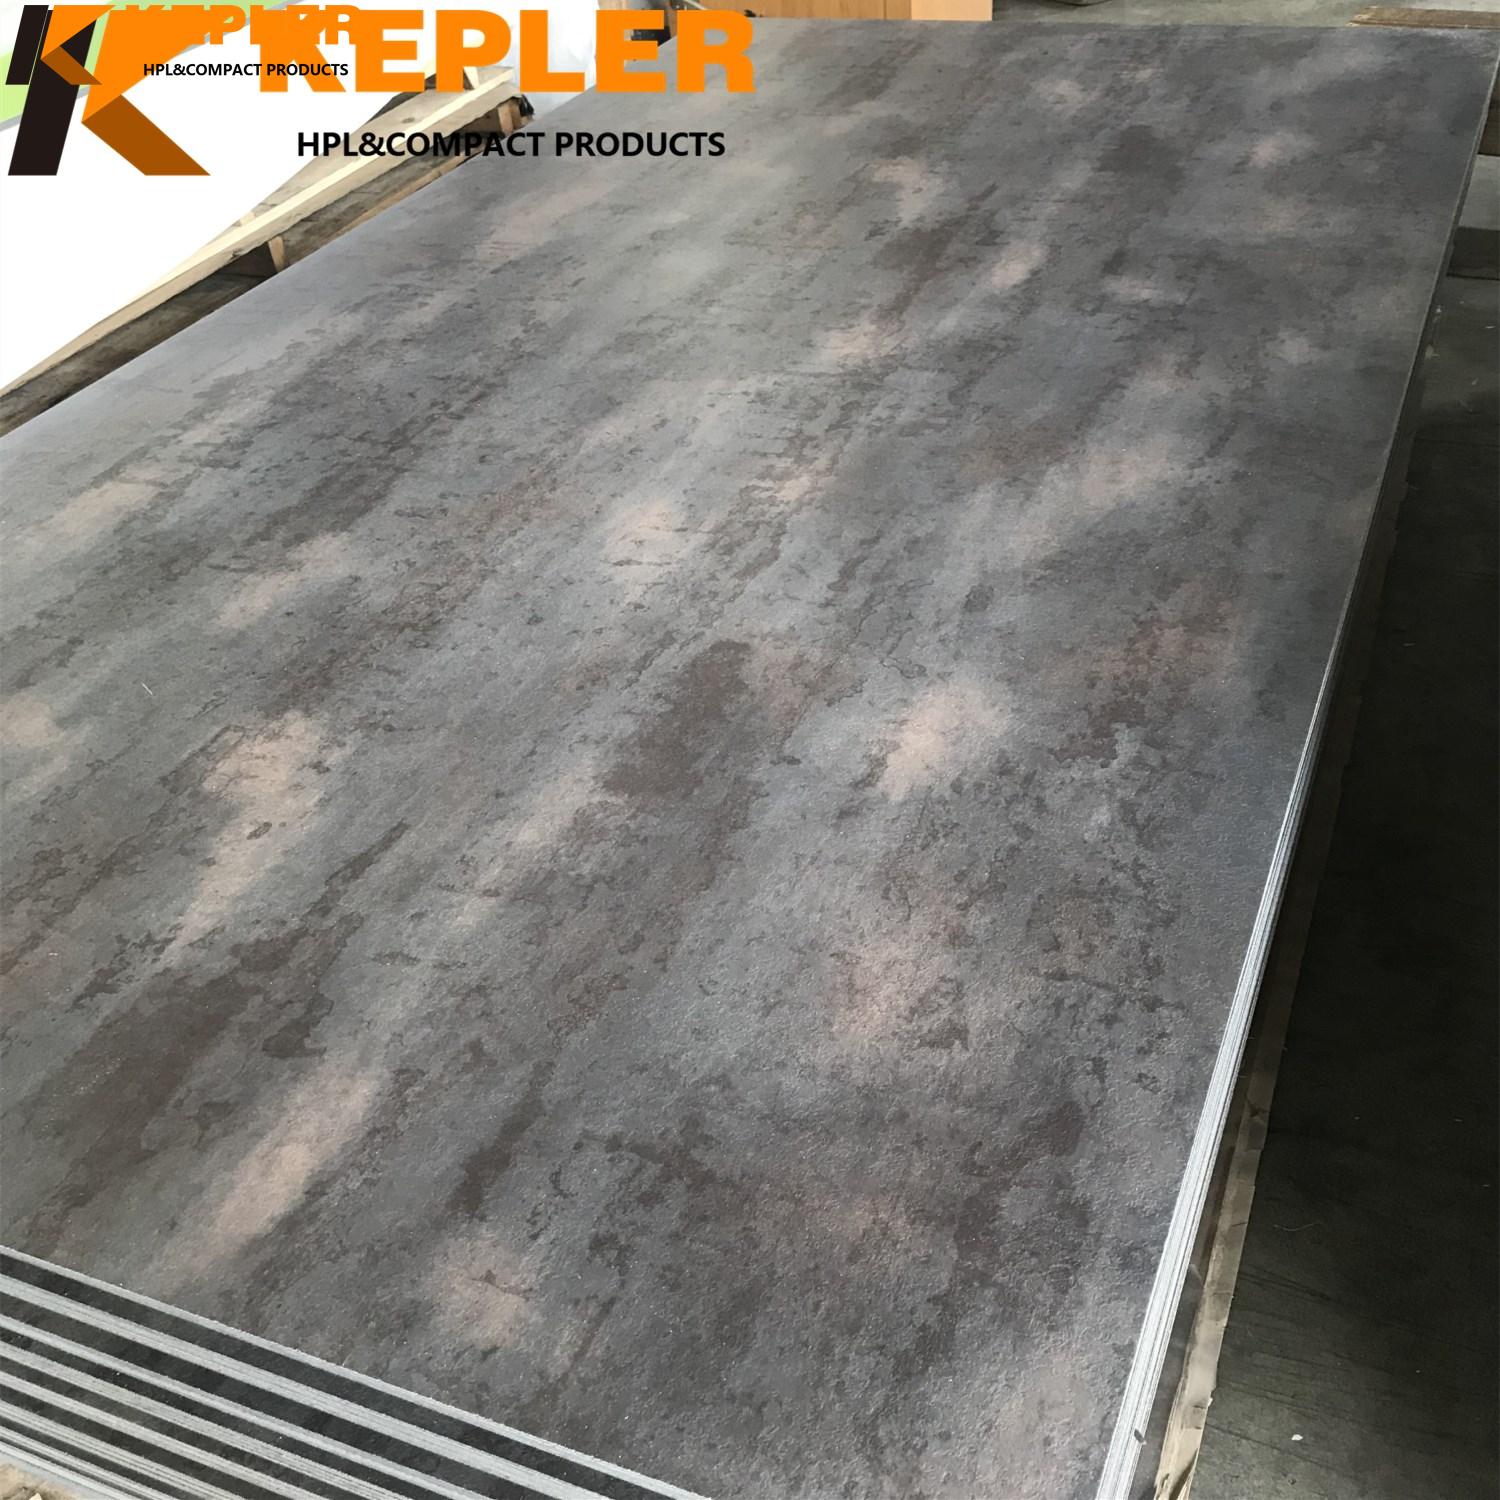 Kepler  special surface treated phenolic compact laminate hpl board